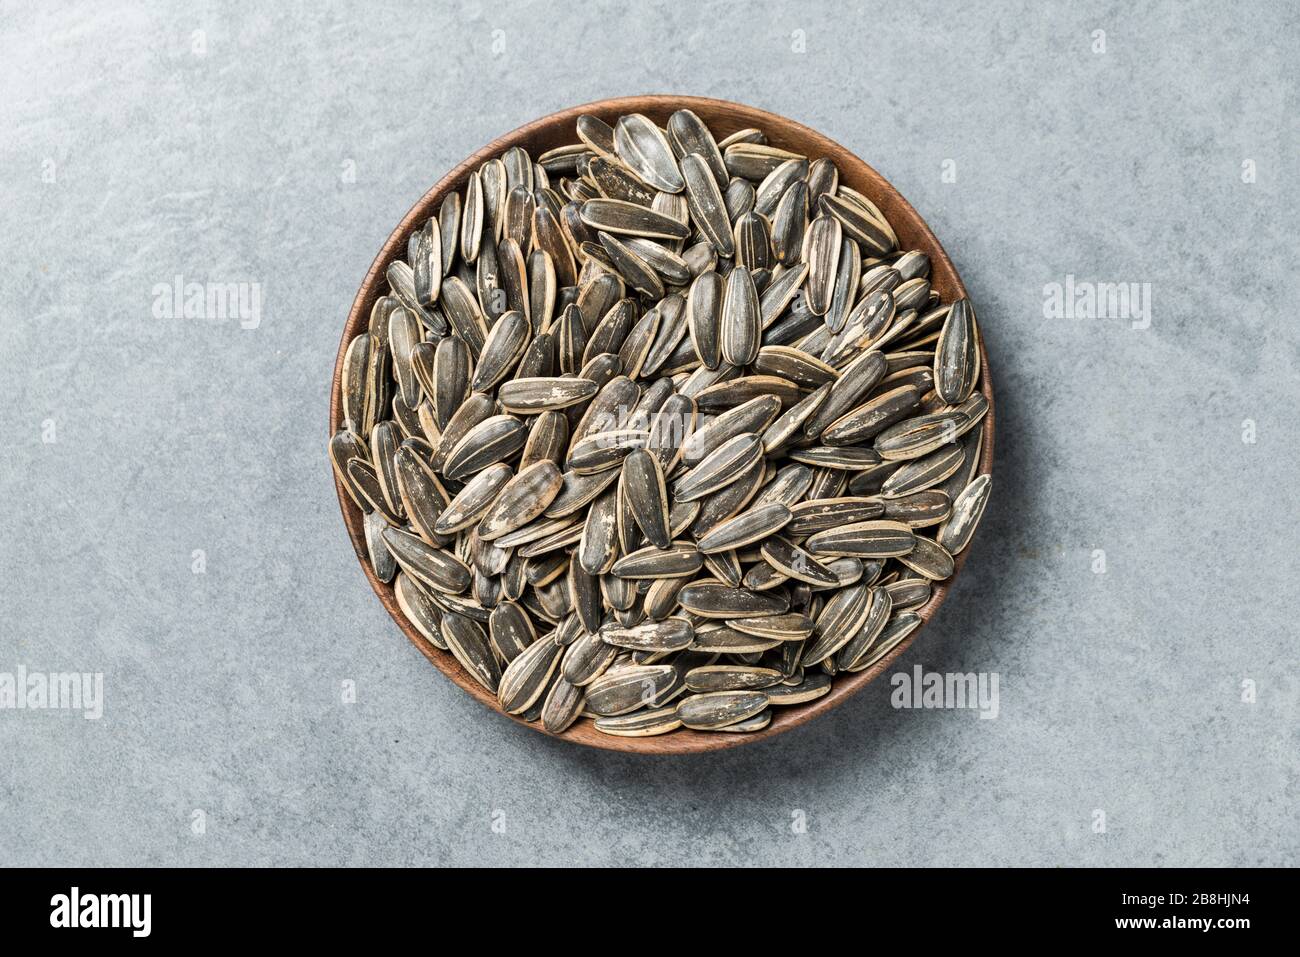 Sunflower Seeds And Tea, Chinese Culture Stock Photo